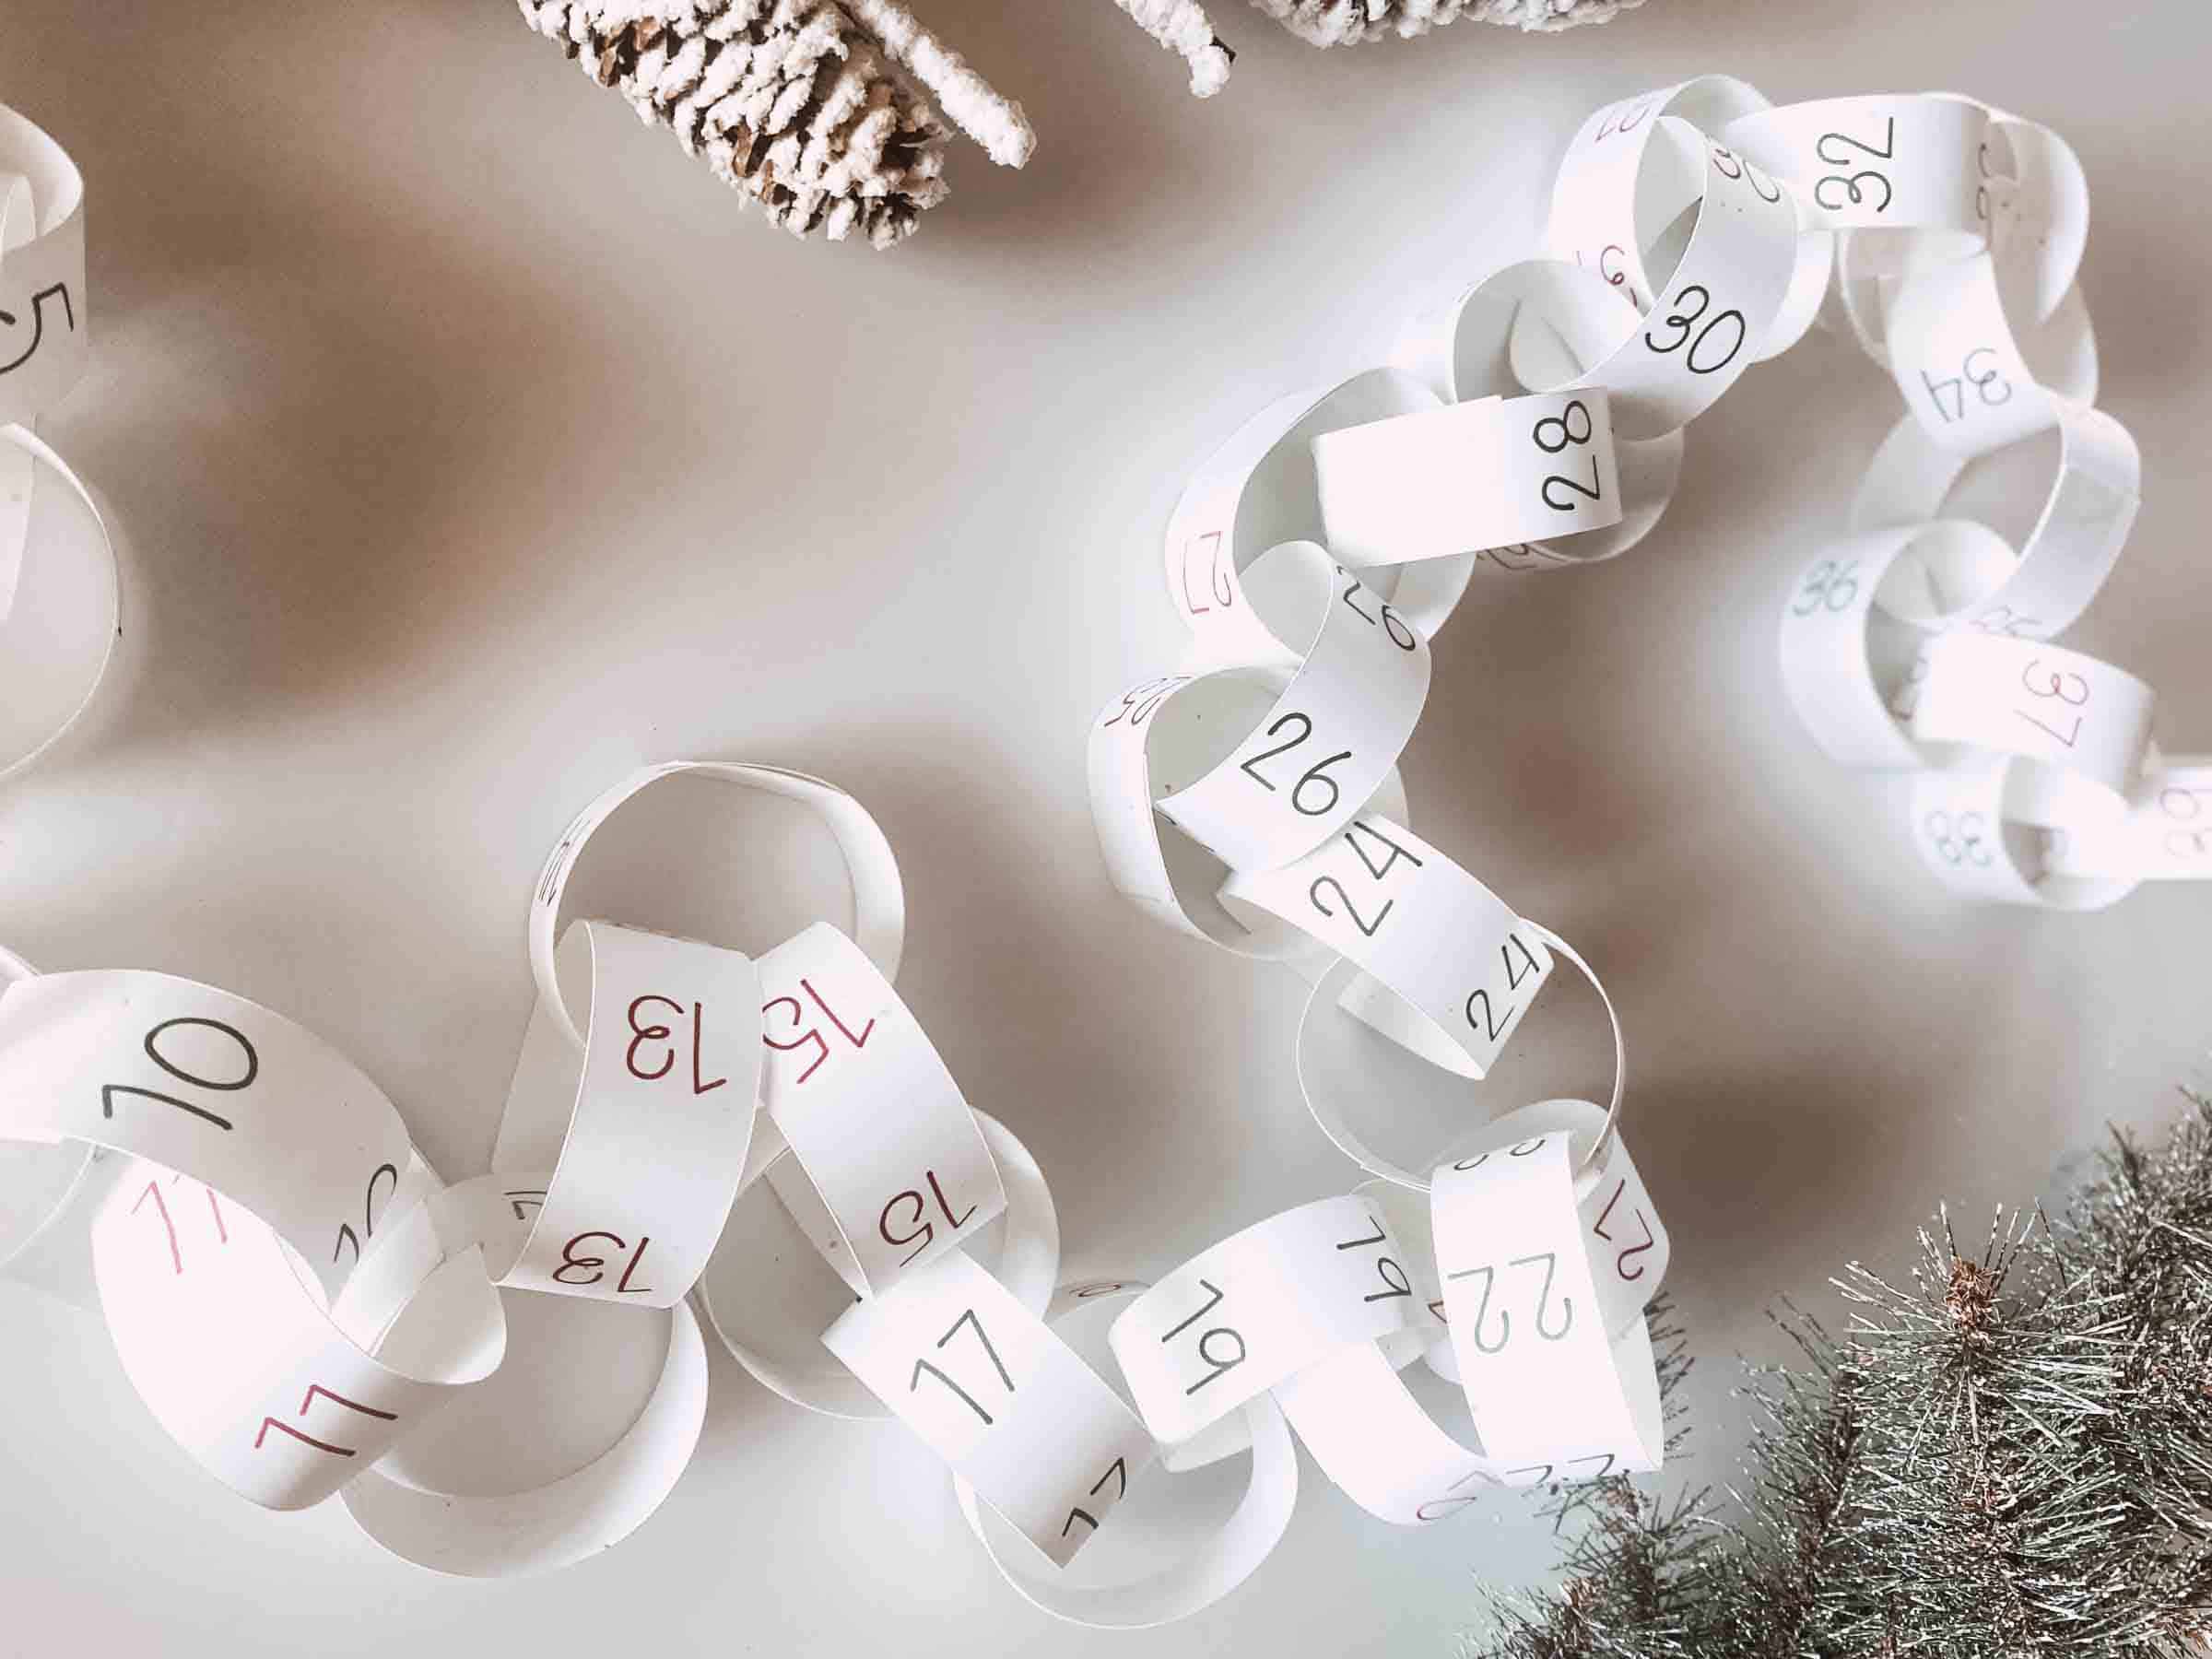 Paper Chain Countdown for Any Occasion